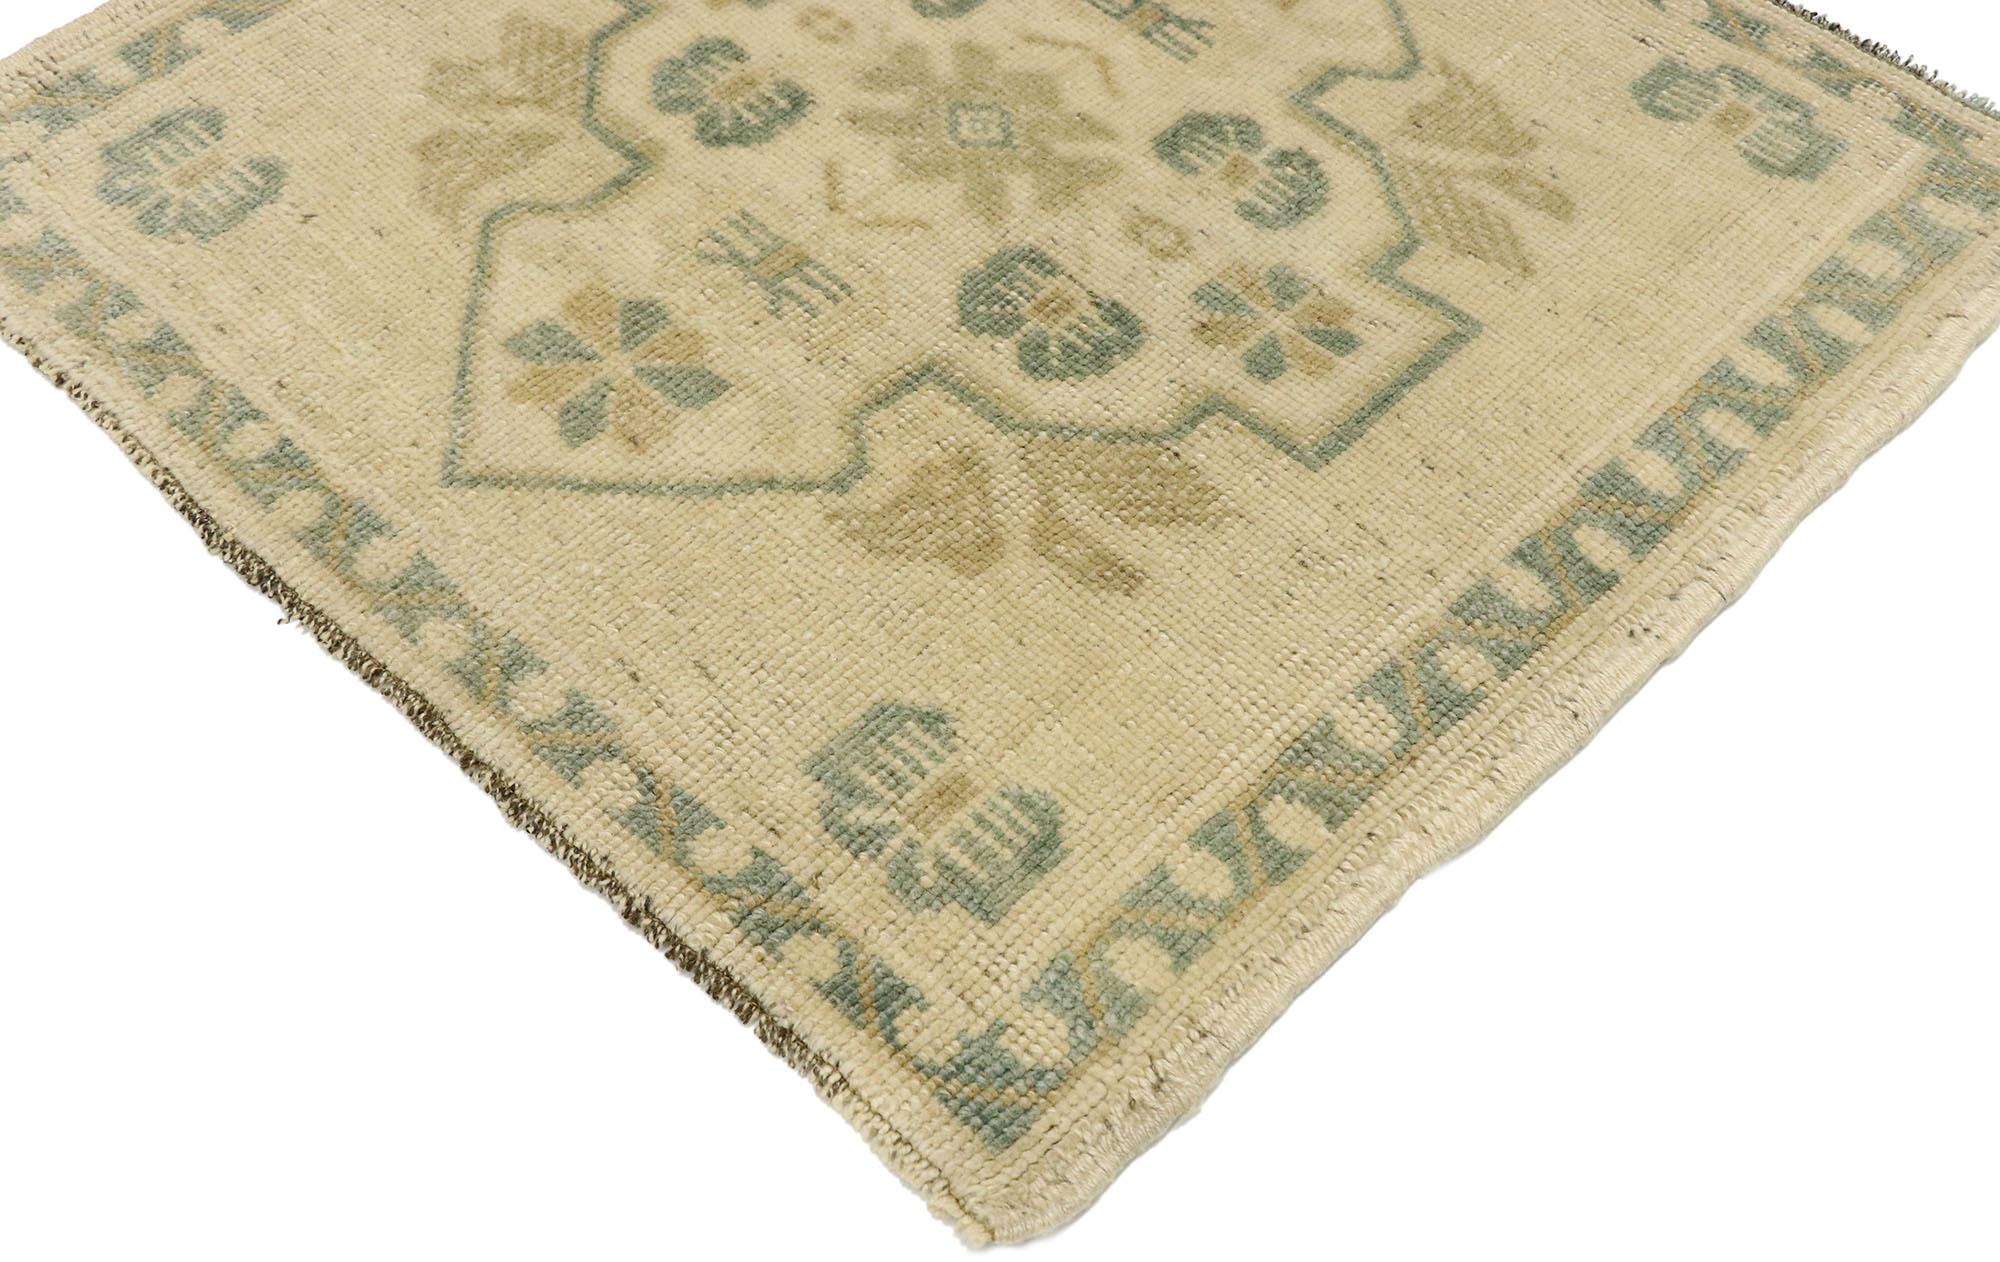 53009 Vintage Turkish Oushak Rug, 01'11 x 02'01. In this hand-knotted wool vintage Turkish Oushak rug, effortless beauty and simplicity intertwine with the soft, bespoke vibes of Neoclassical cottage style. The ecru-tan antique-washed field serves